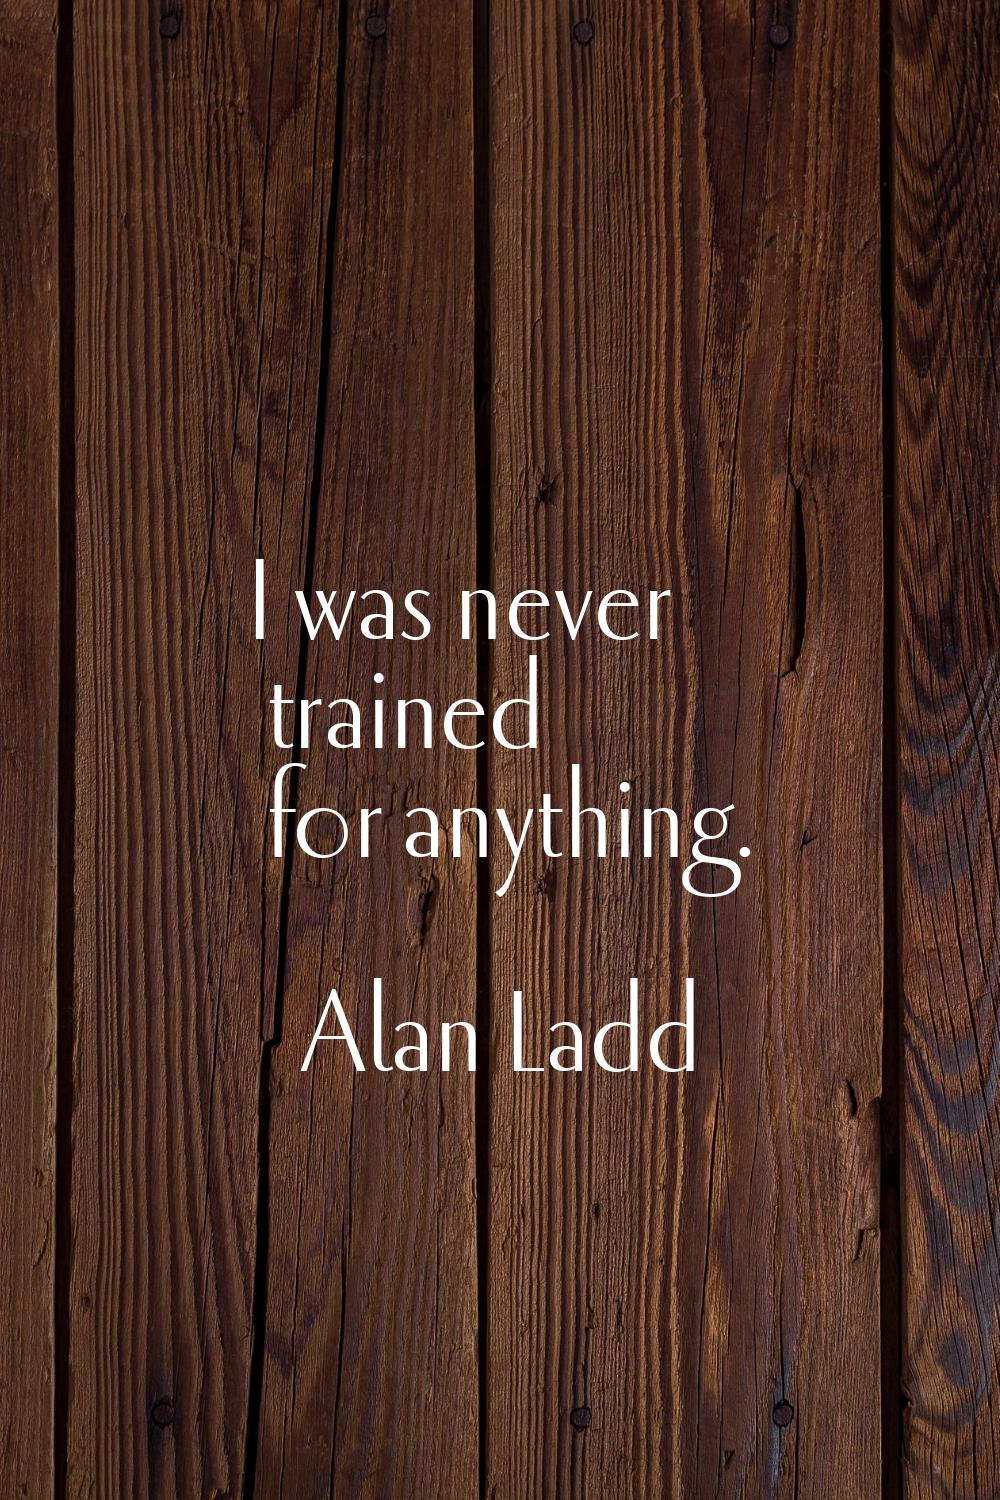 I was never trained for anything.